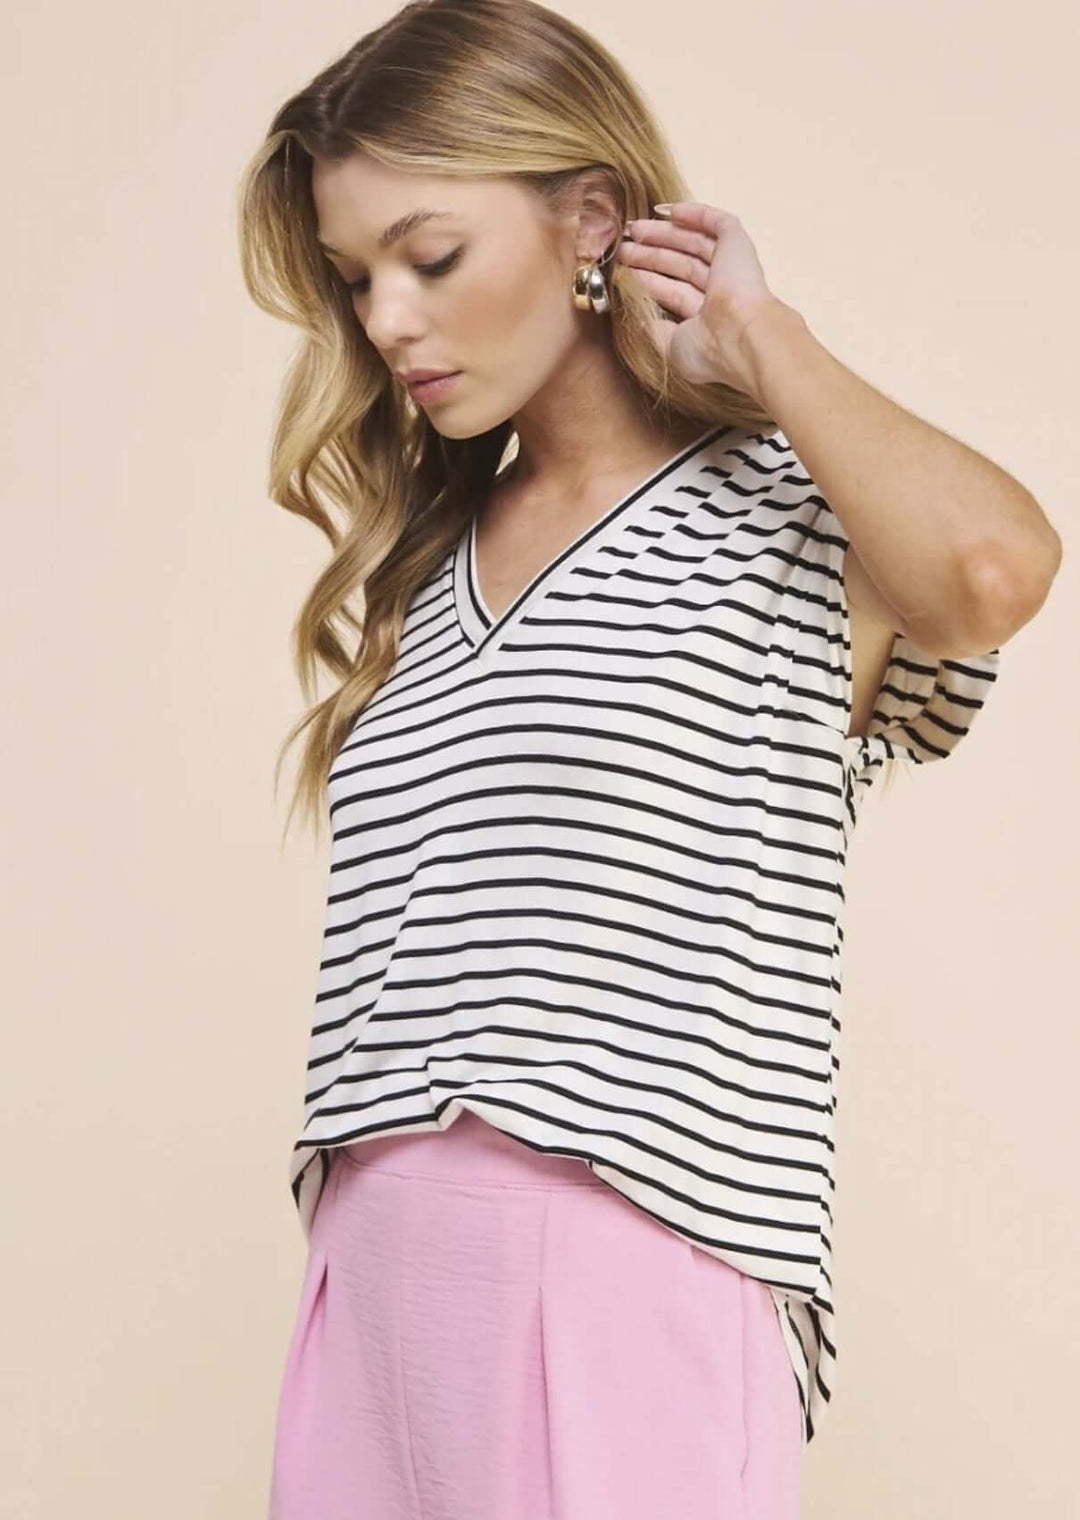 USA Made Women's Super Soft Striped V-Neck Relaxed Fit Tee in Black & White Stripes   | Classy Cozy Cool Made in America Clothing Boutique